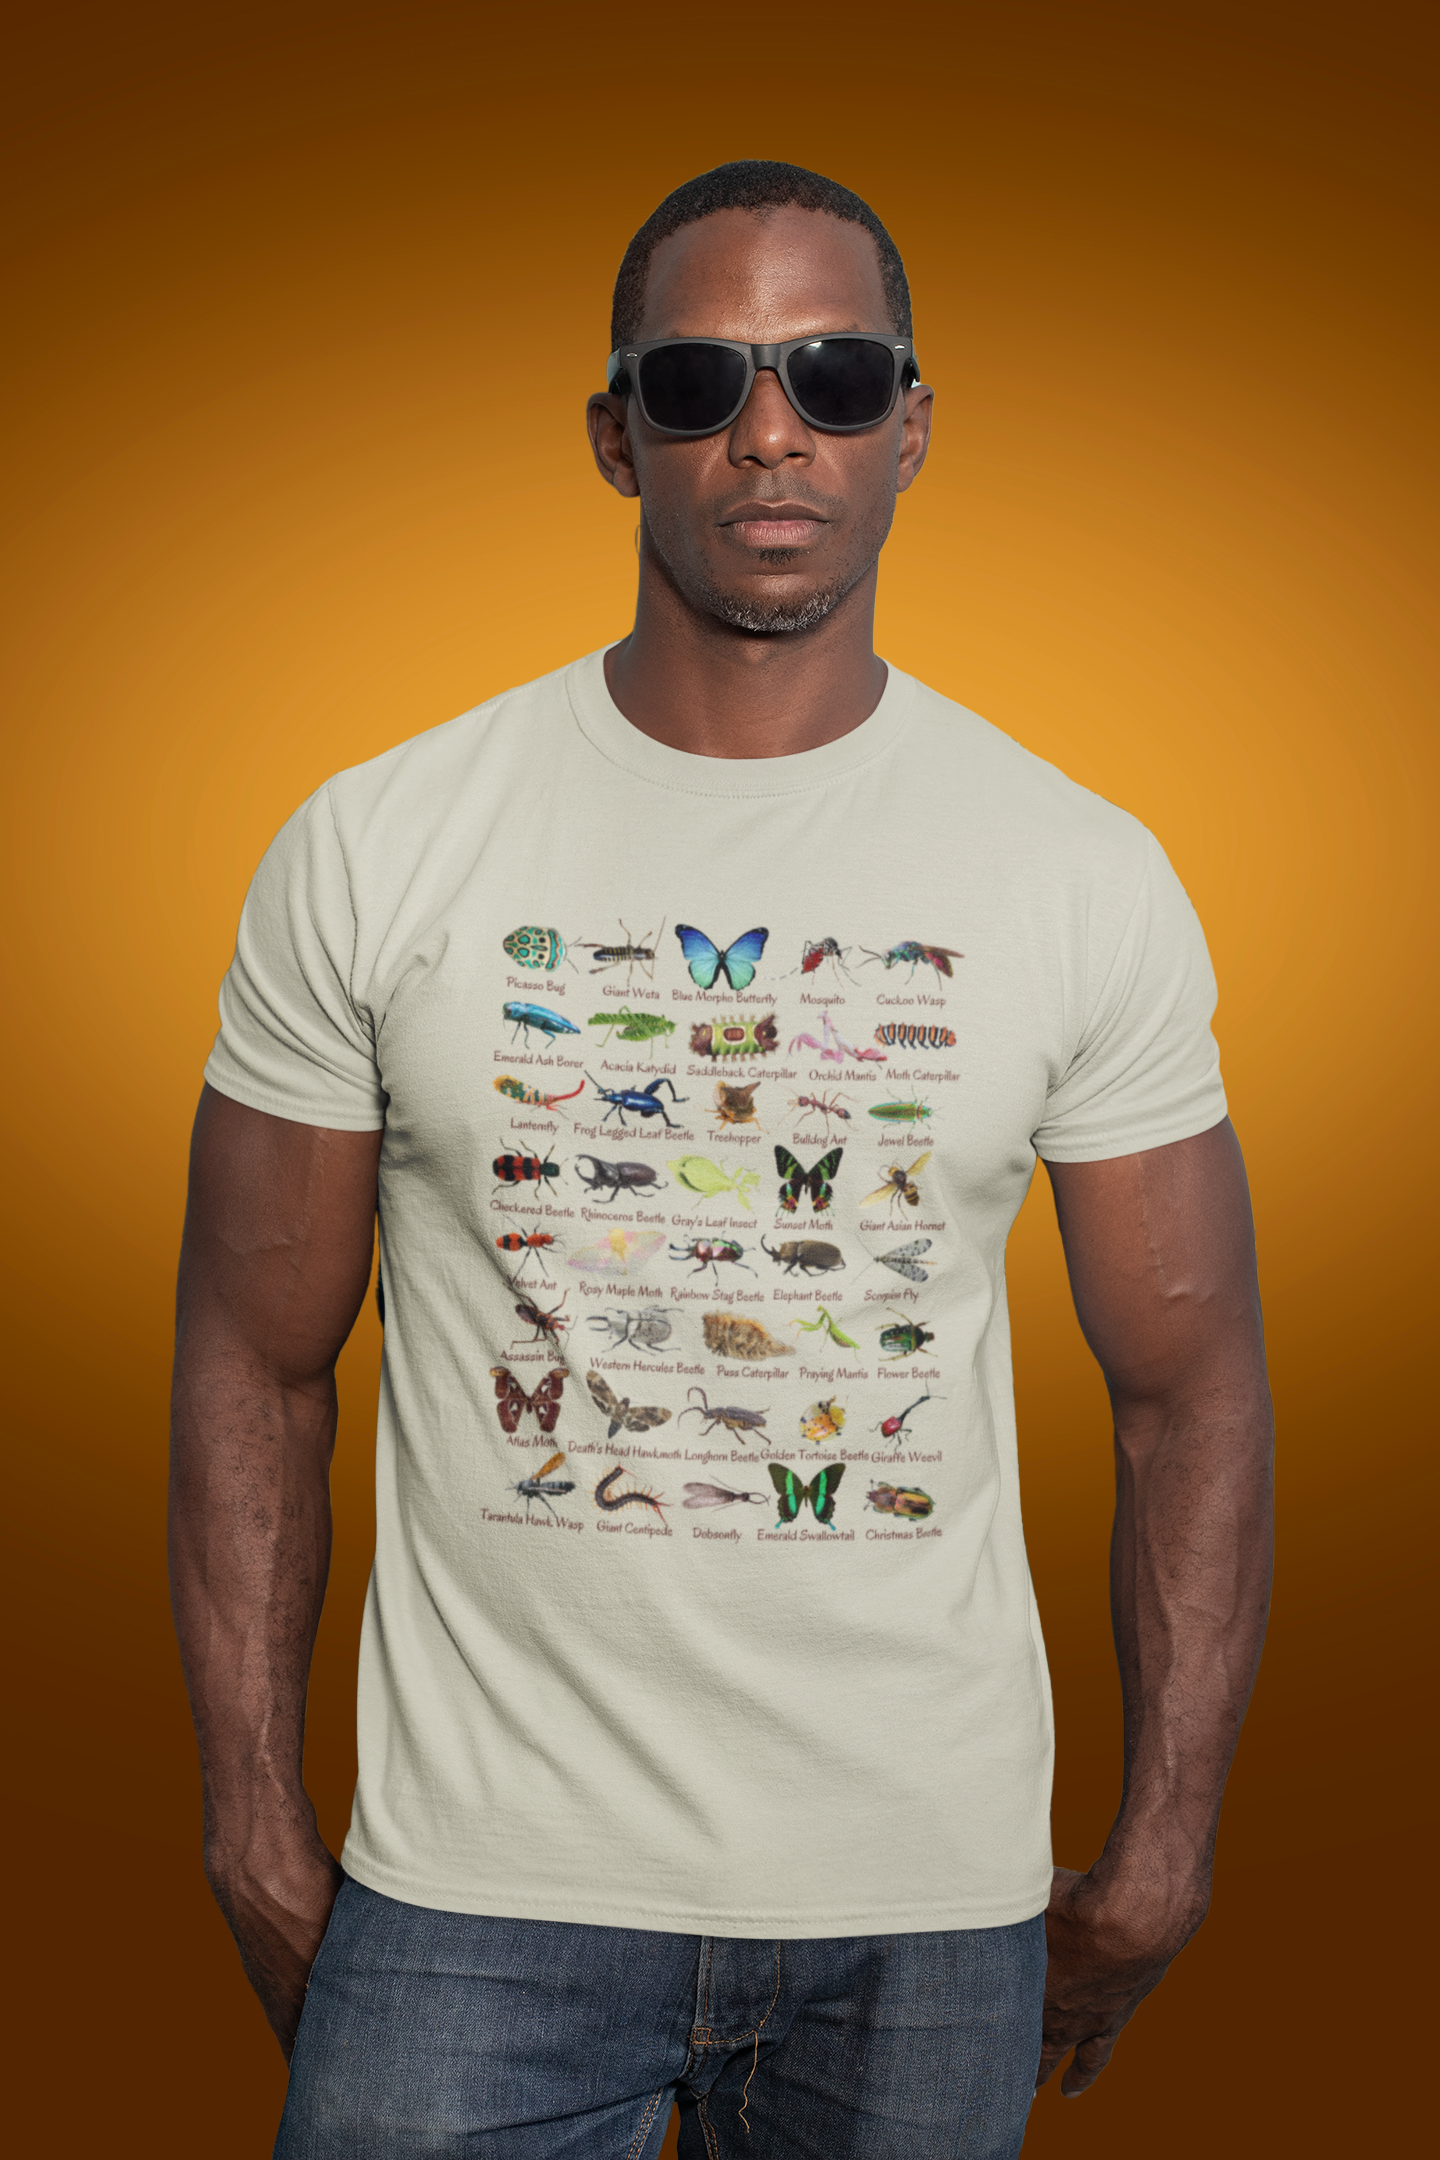 Impressive Insects T-shirt with 40 cool bugs